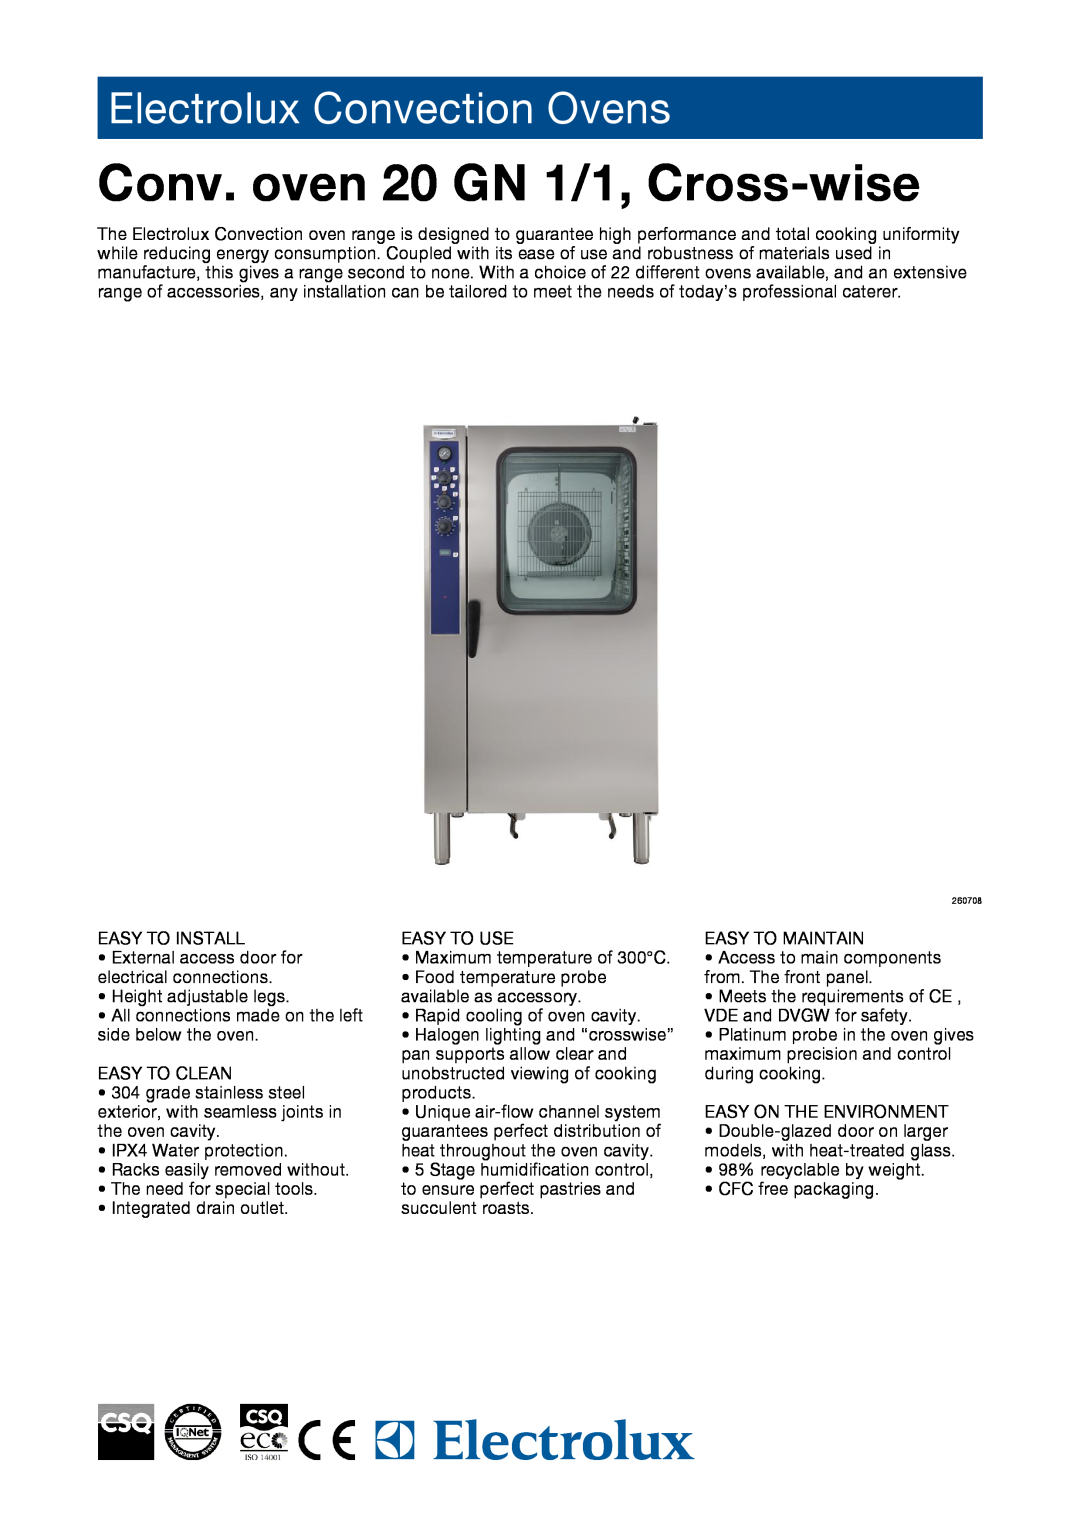 Electrolux 260708, EAA040 manual Conv. oven 20 GN 1/1, Cross-wise, Electrolux Convection Ovens 